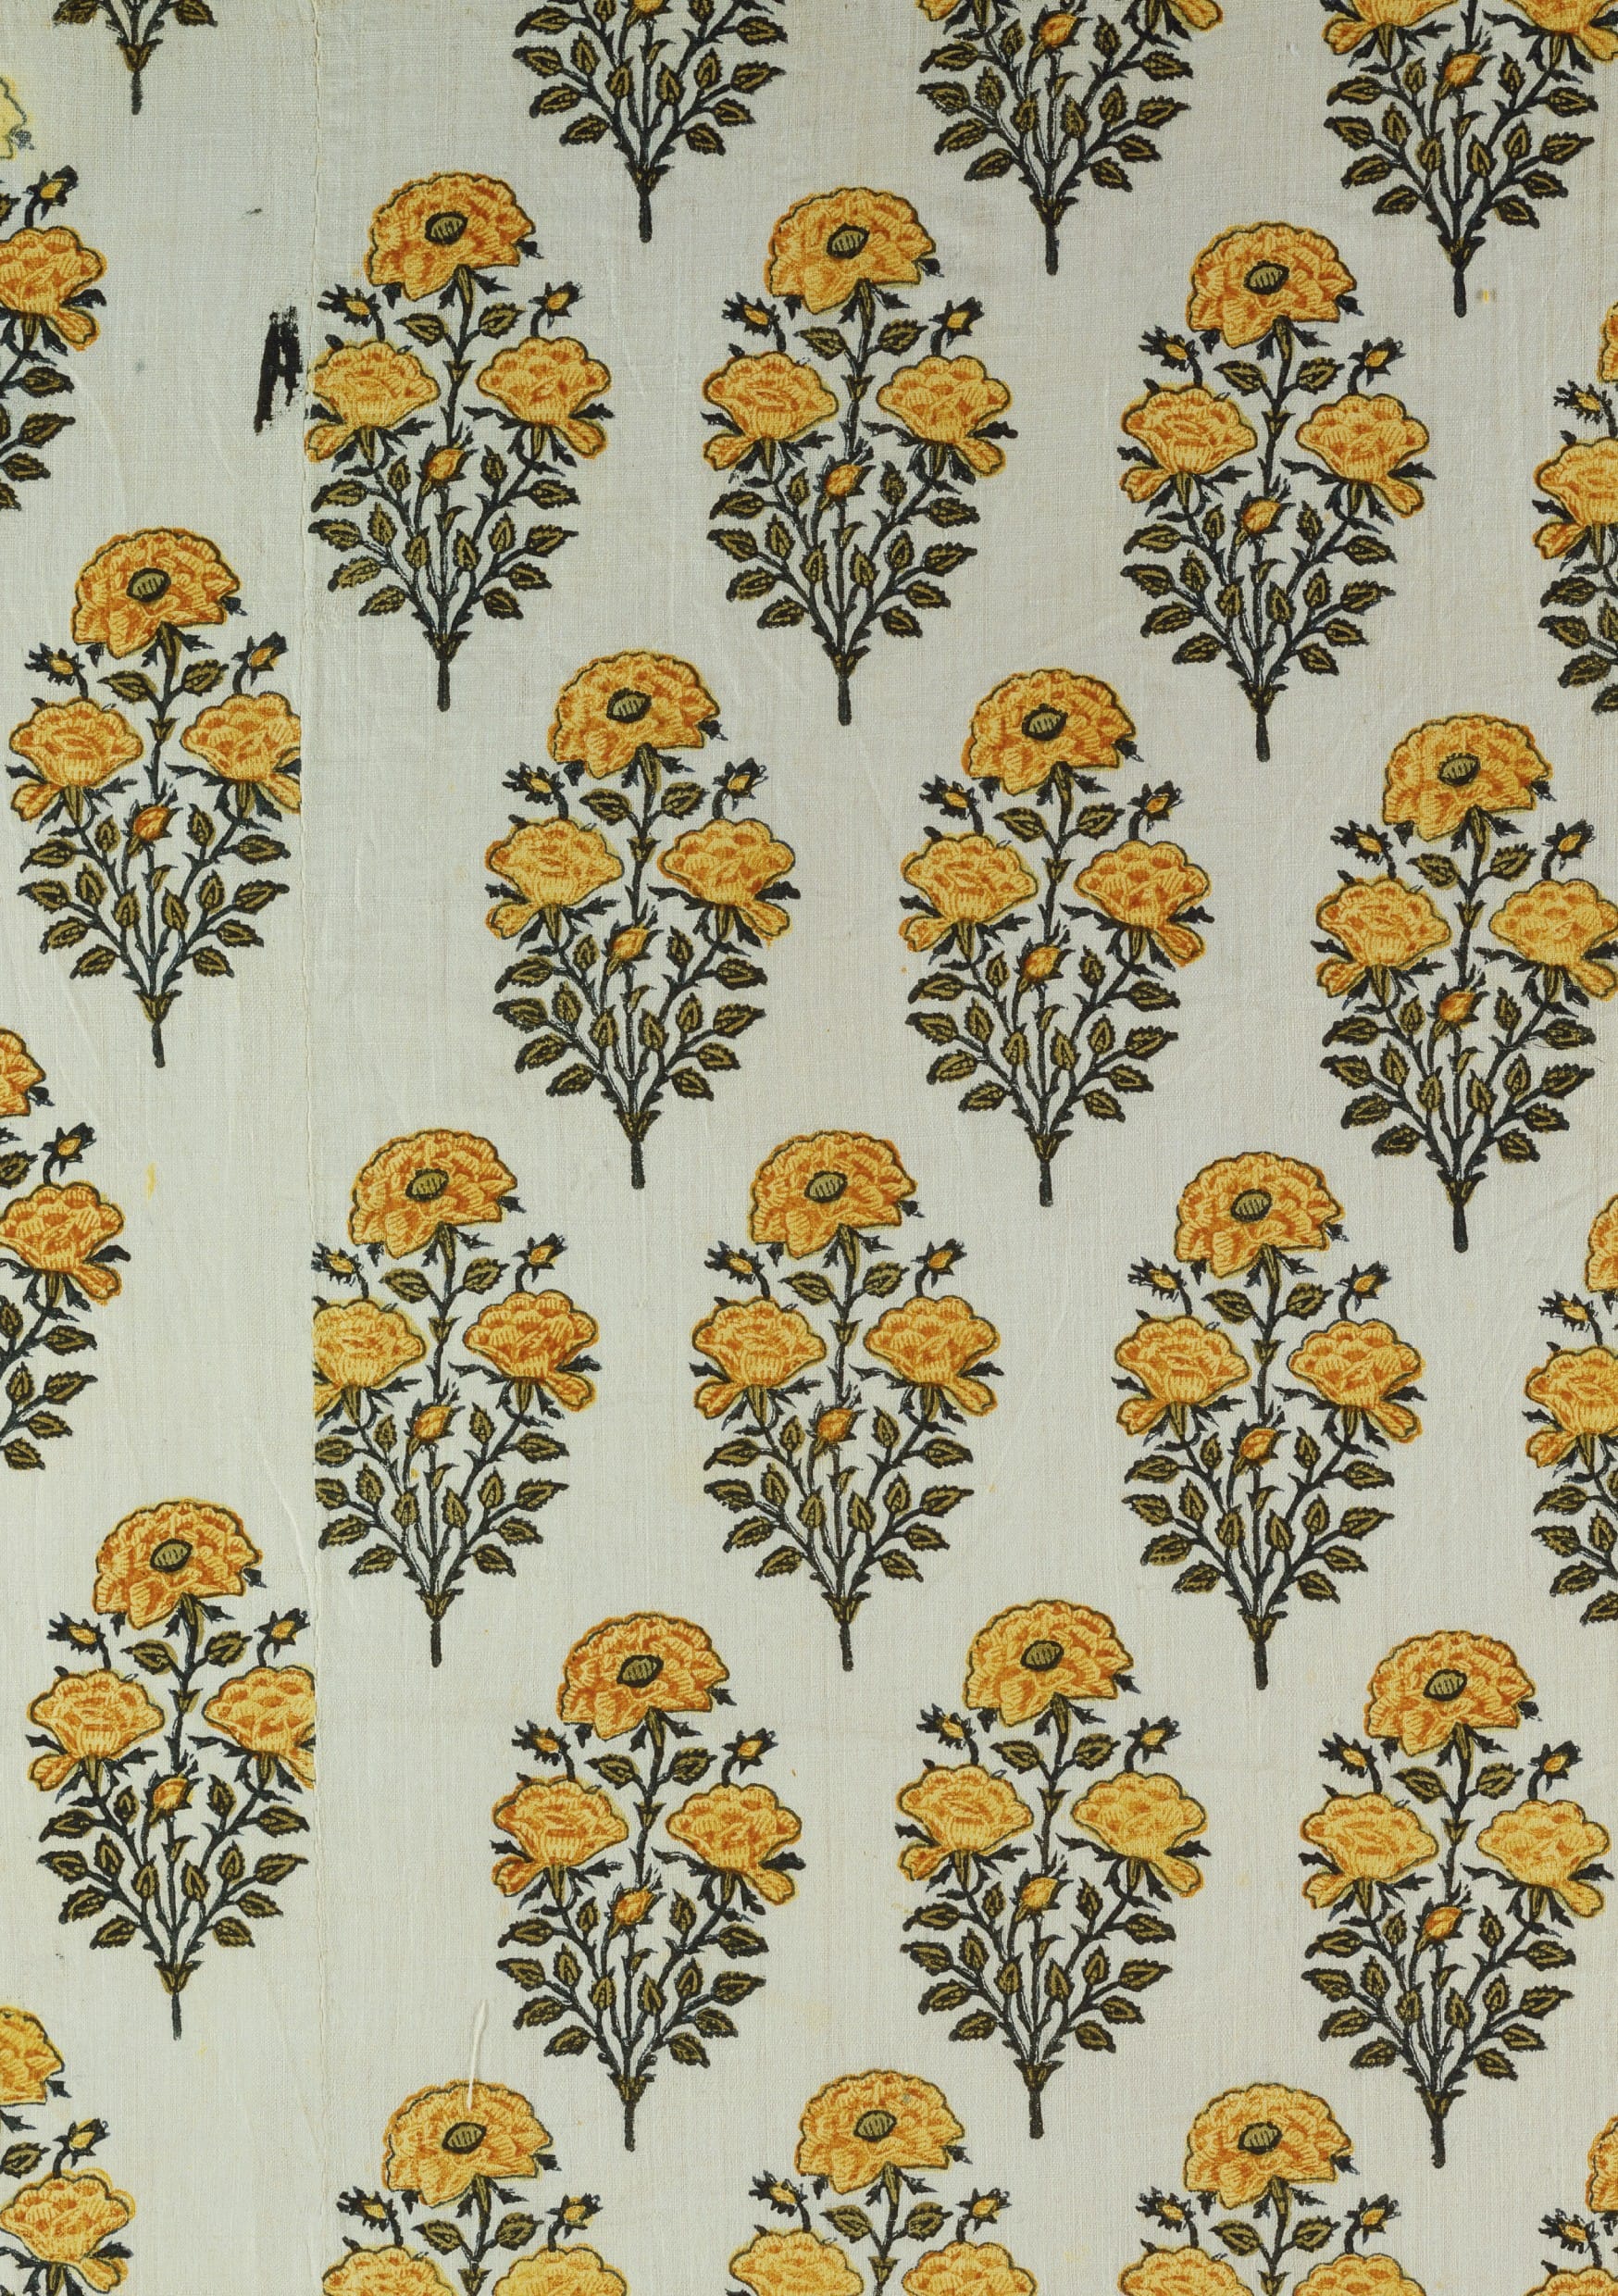 Indian Floral Patterns in Design and Textiles